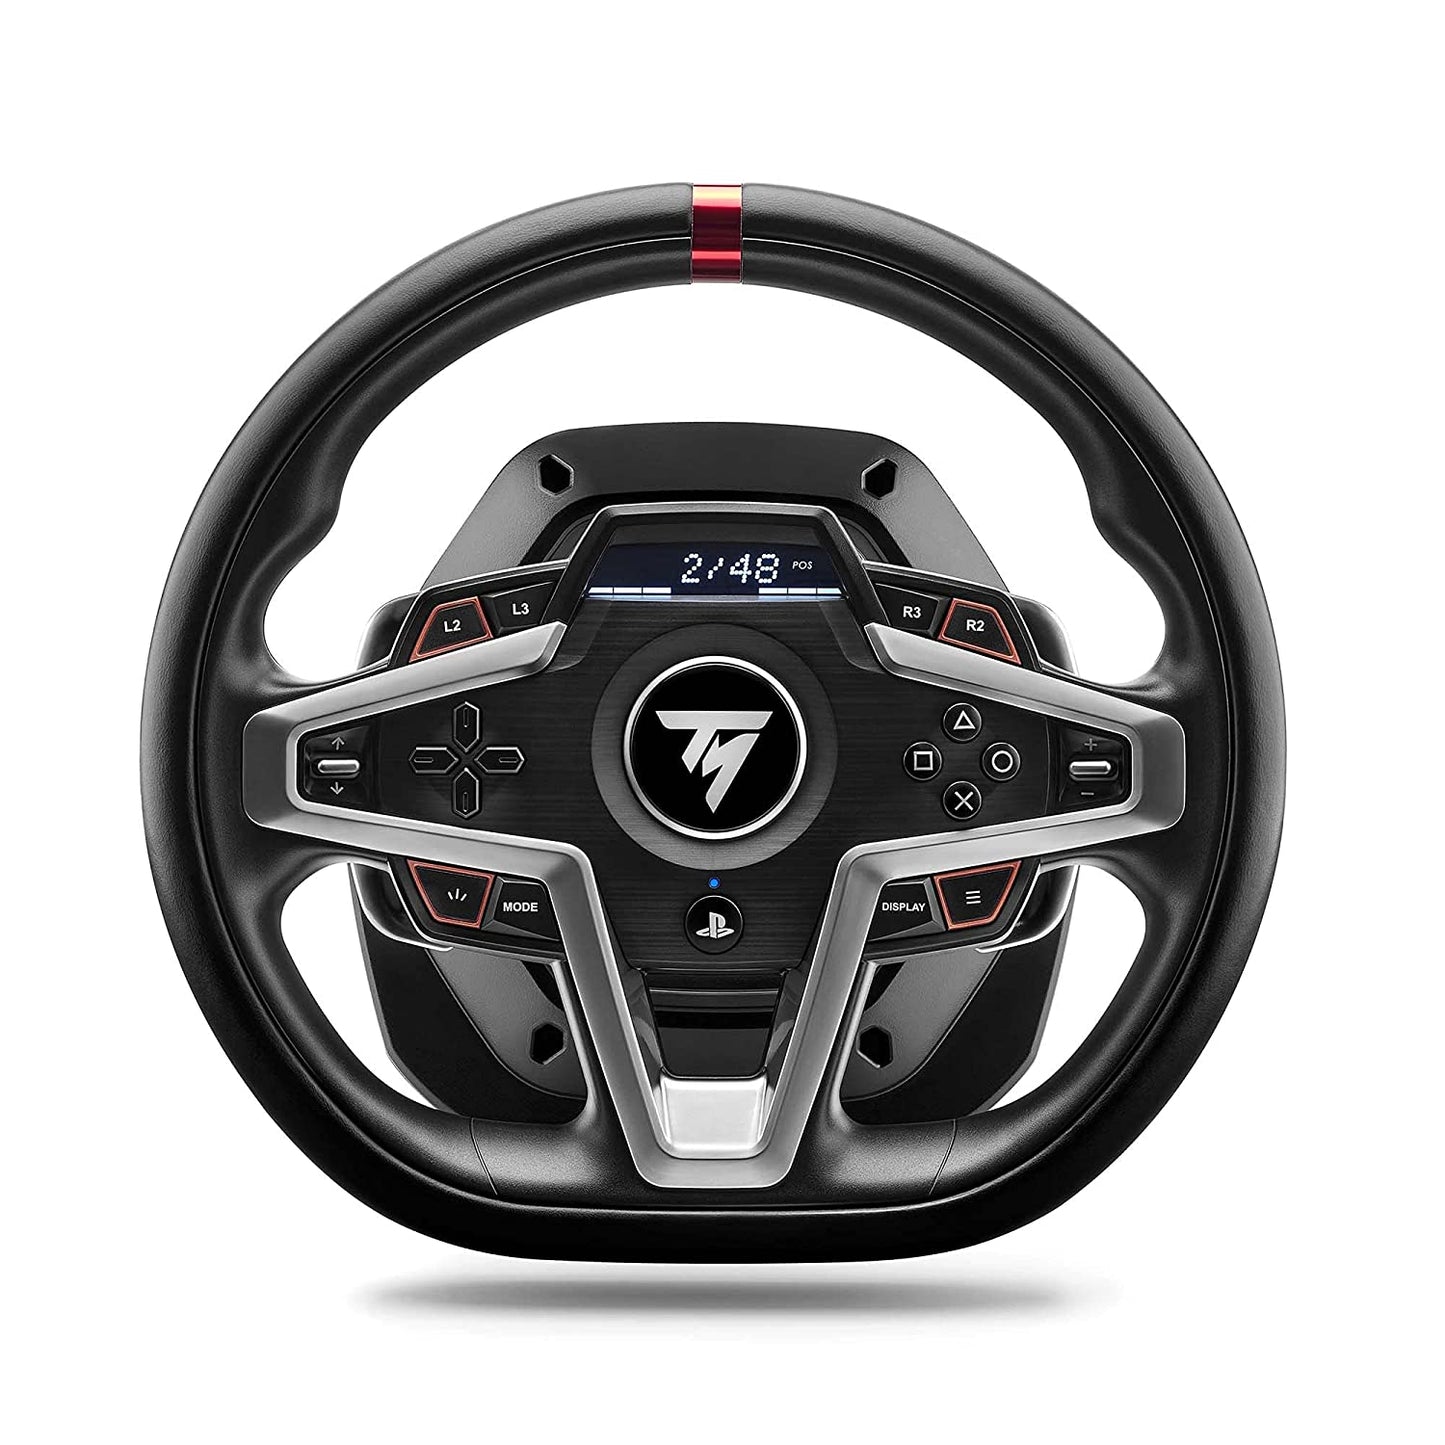 Thrustmaster T248 Racing Wheel HYBRID DRIVE with Screen - PS5 | PS4 | PC